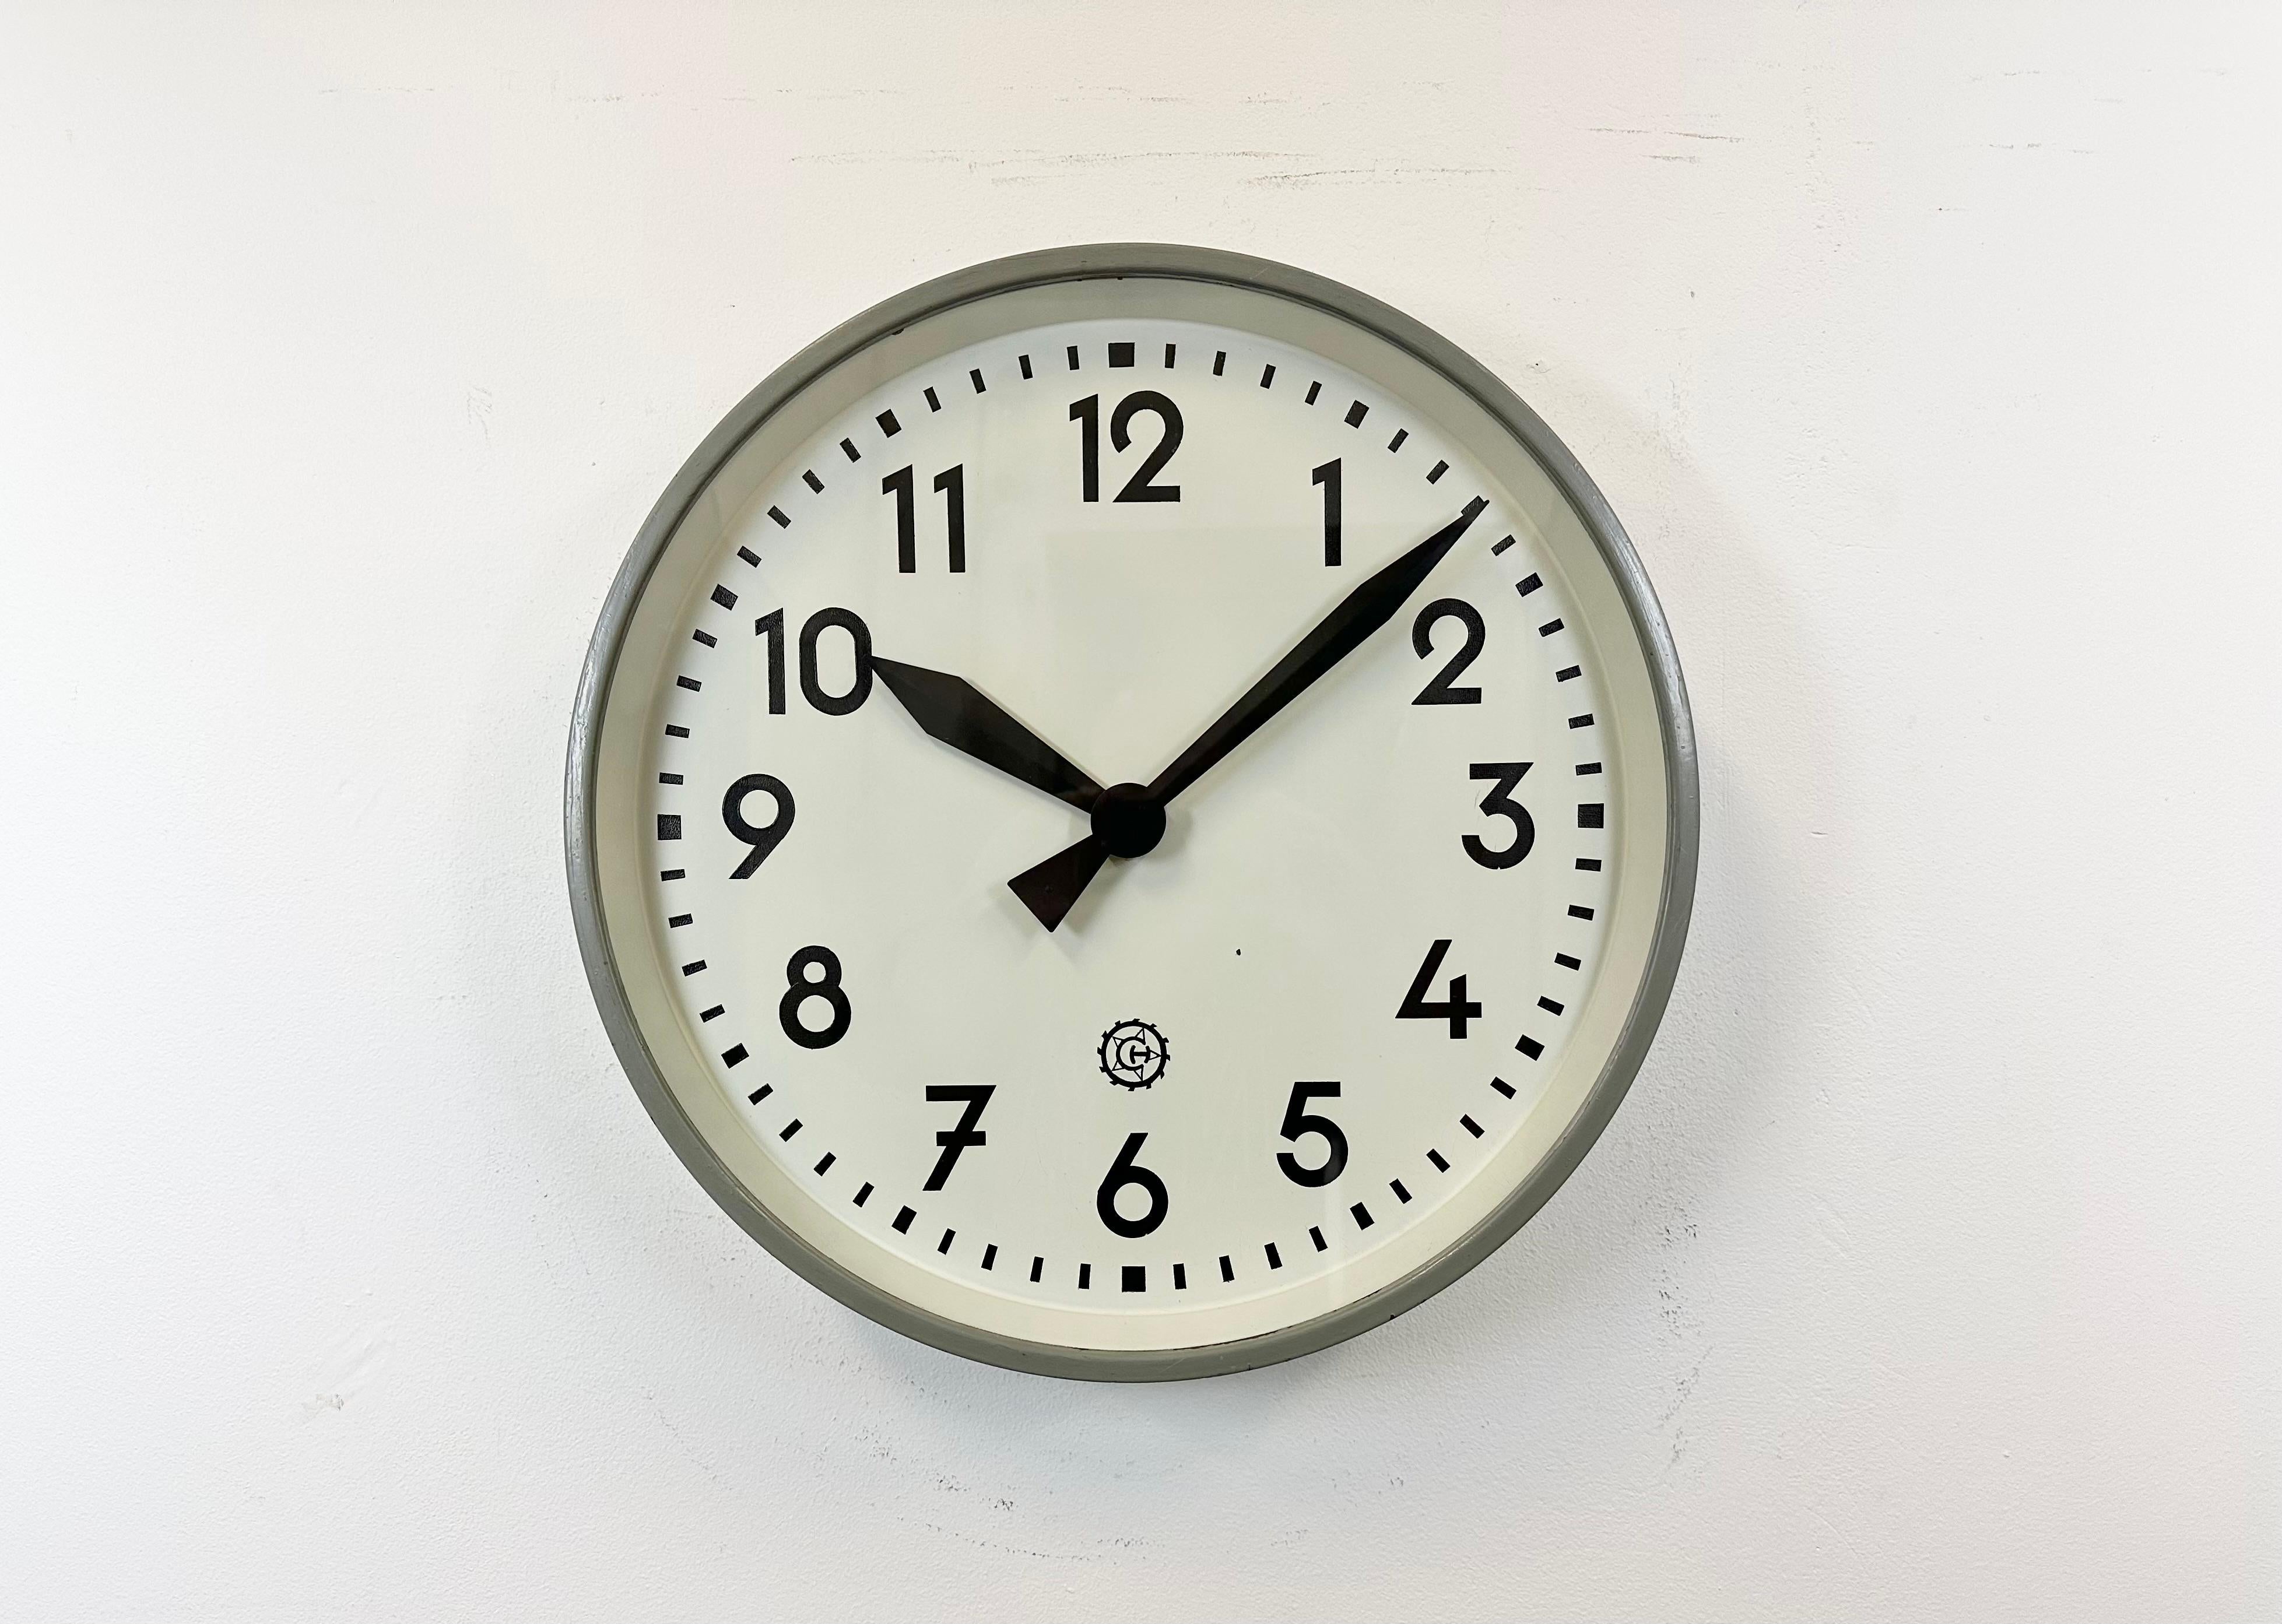 This wall clock was produced by Chronotechna in former Czechoslovakia during the 1950s. It features a grey metal frame, an iron dial,an aluminium hands and a clear glass cover. The piece has been converted into a battery-powered clockwork and